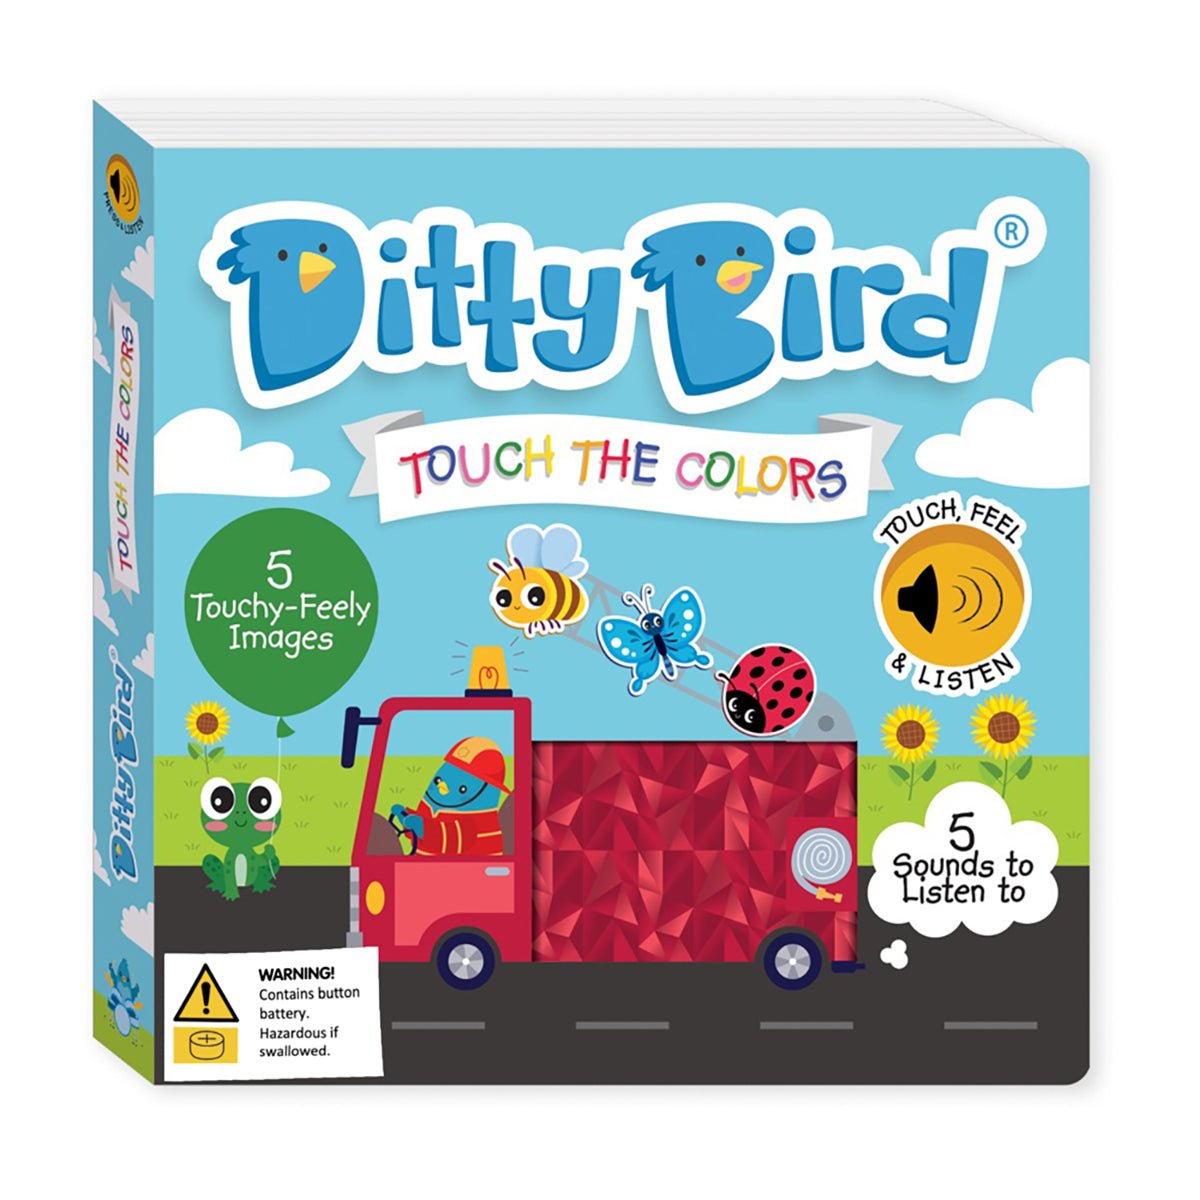 Ditty Bird Touch The Colours | Ditty Bird